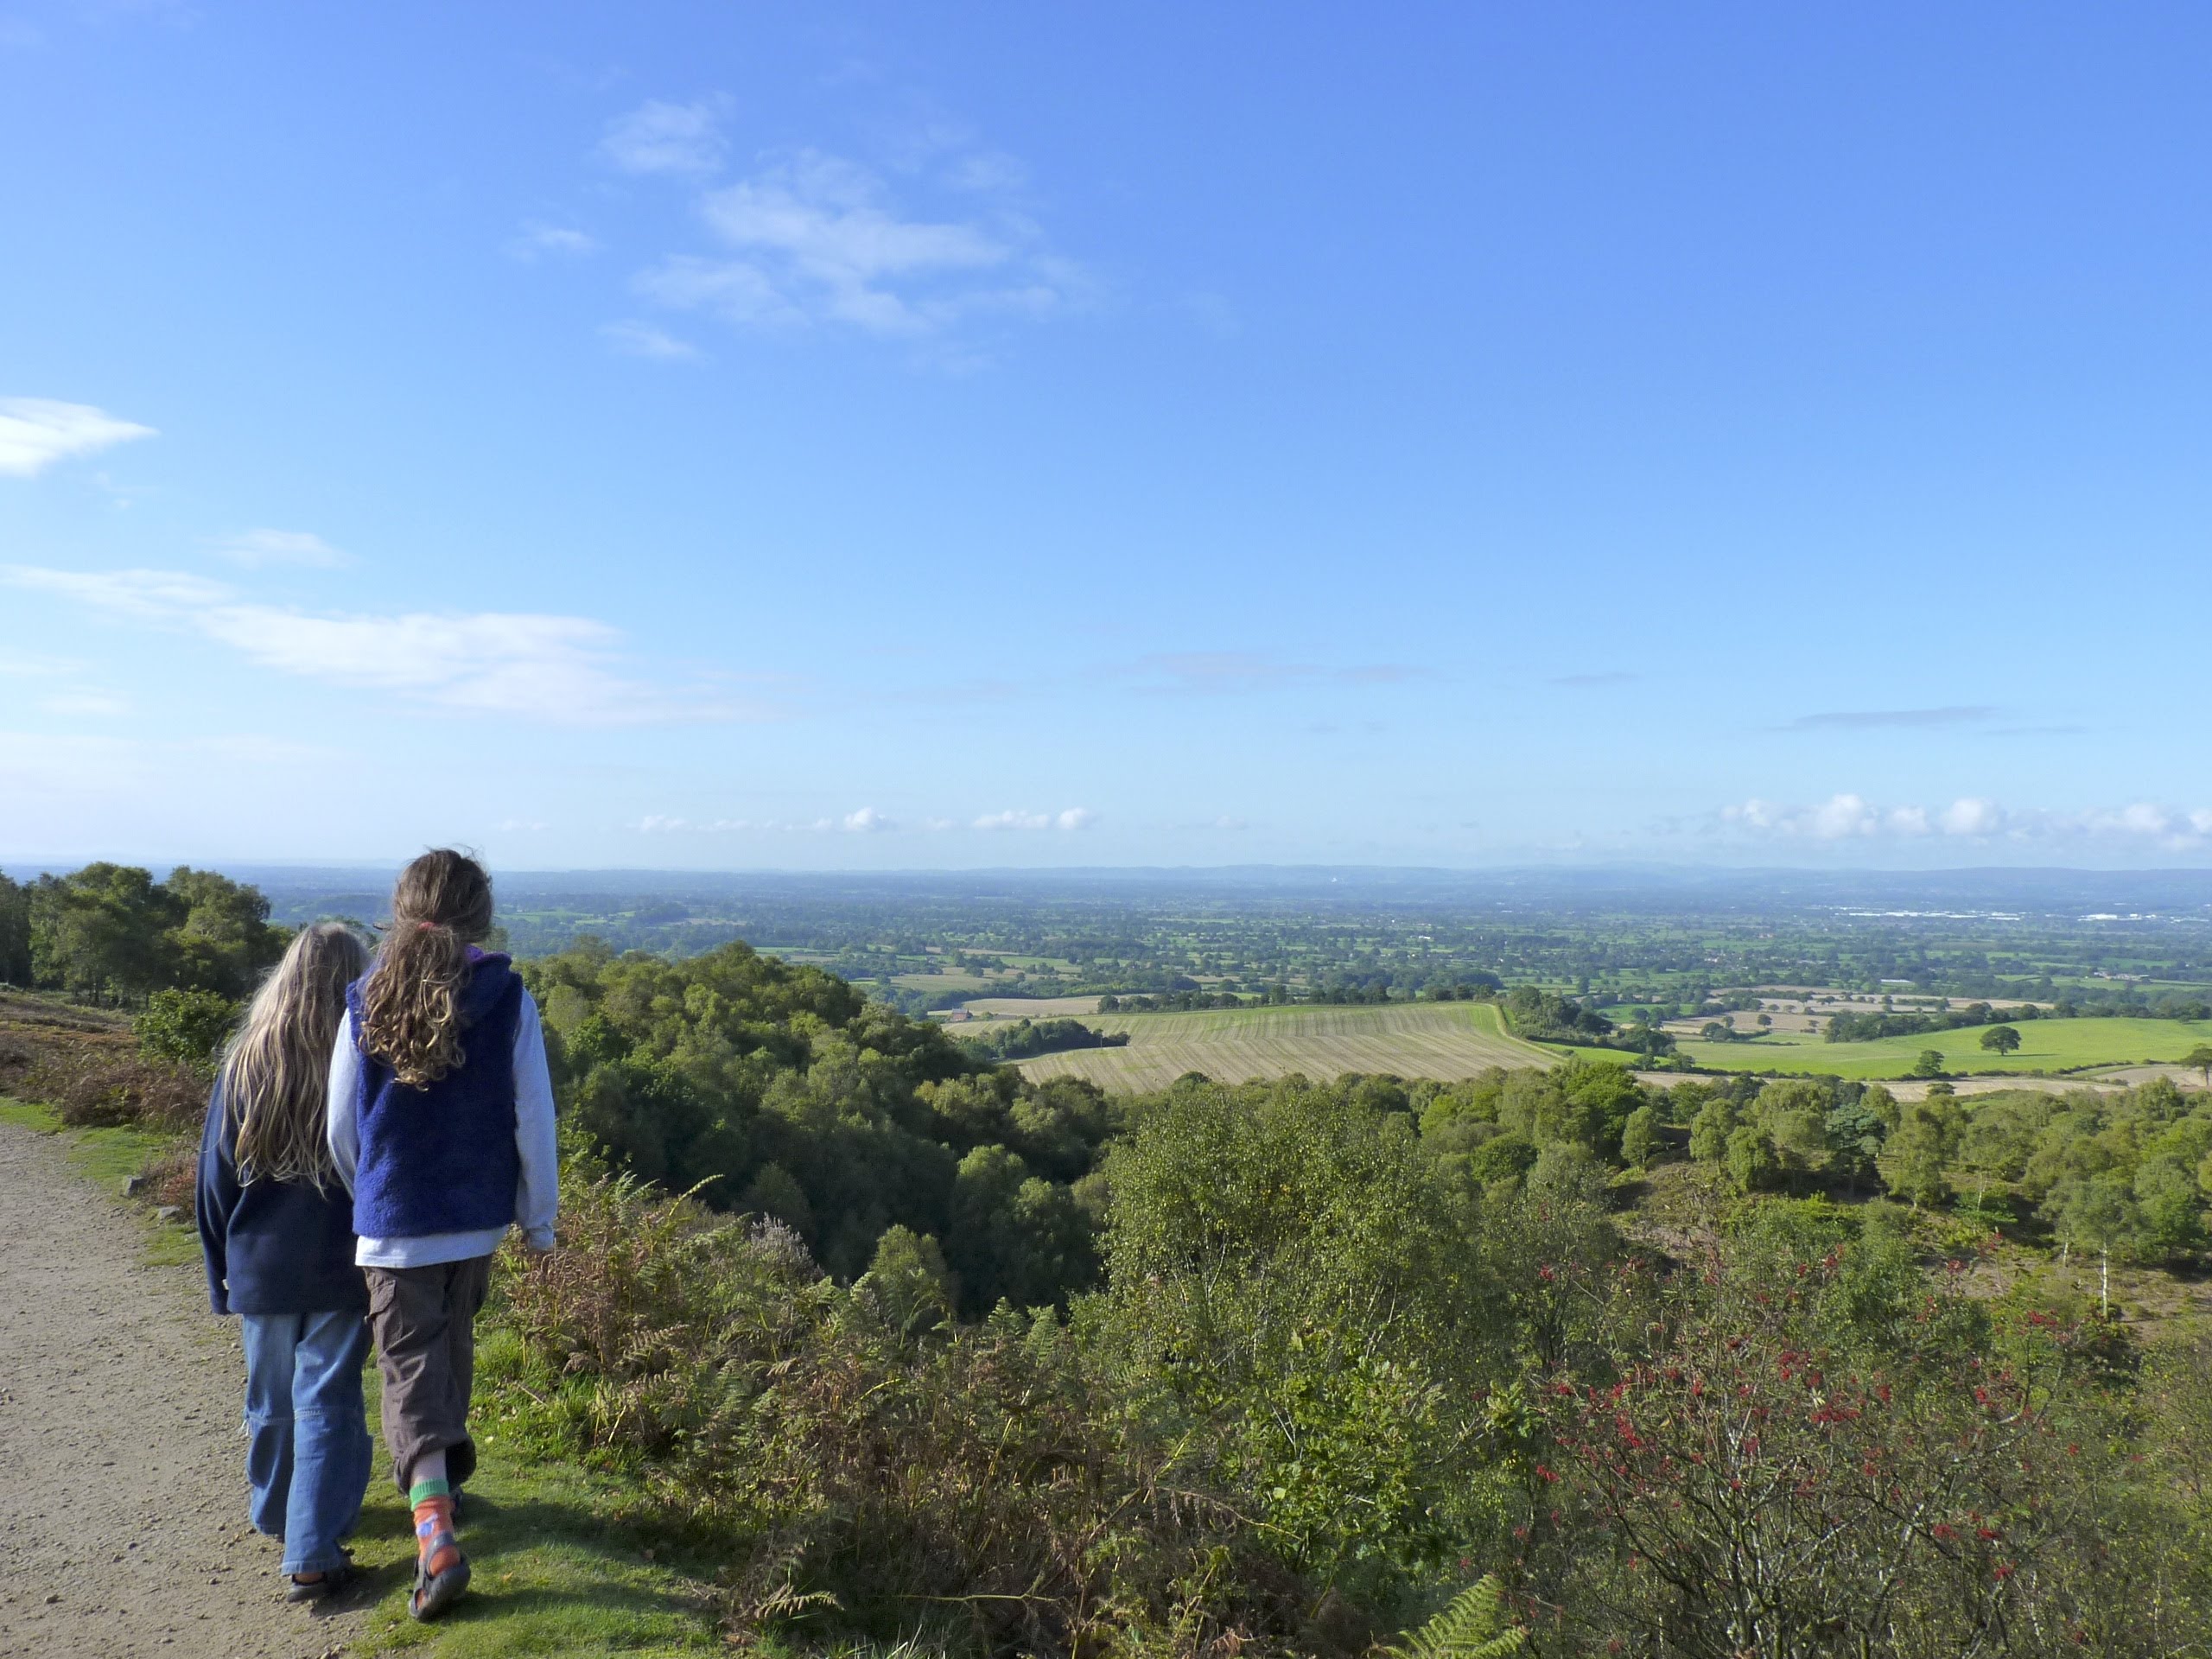 View from the Bickerton Hills, part of the Sandstone Ridge